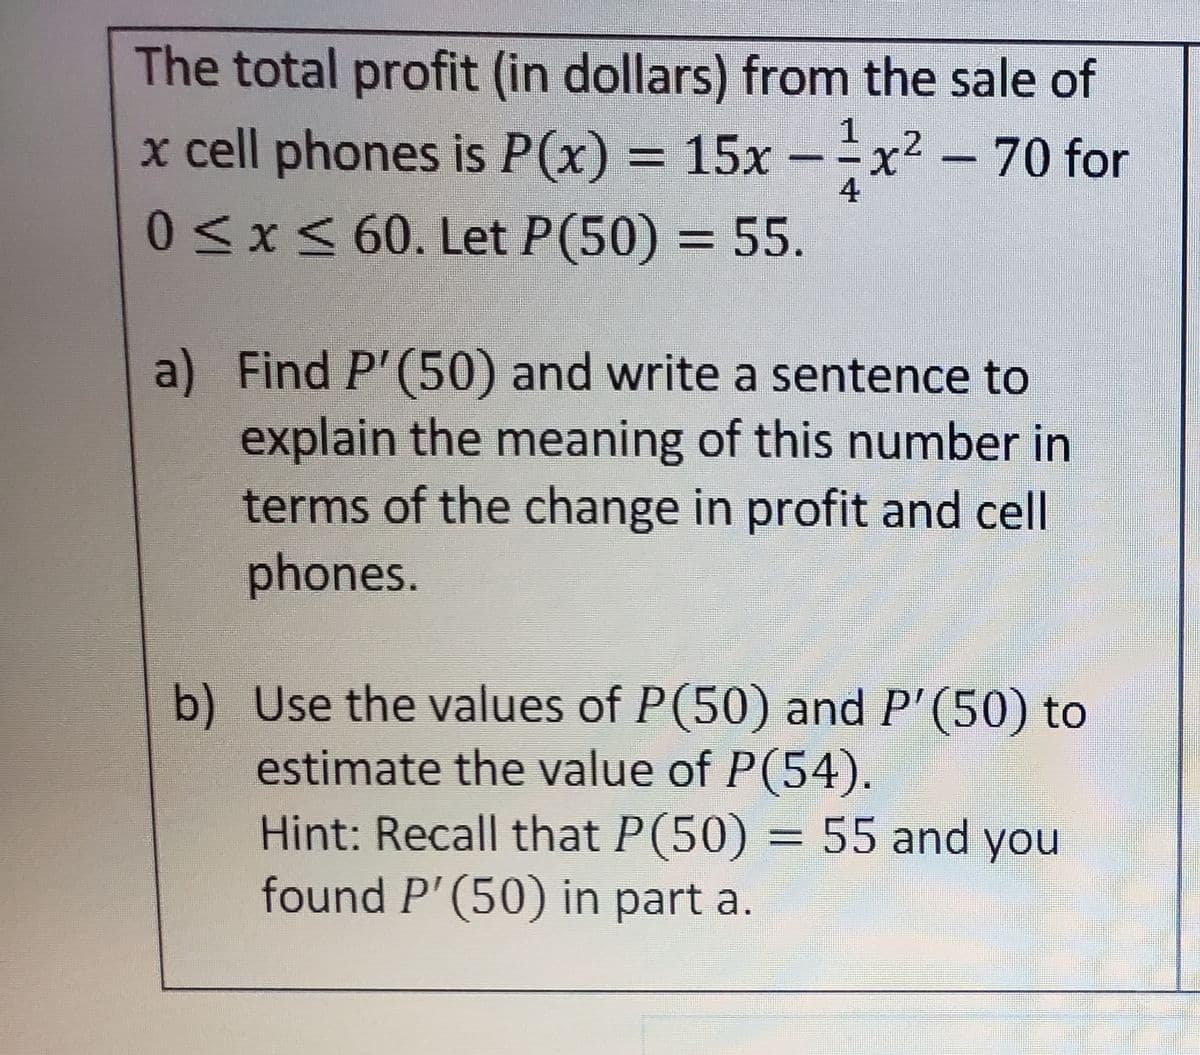 The total profit (in dollars) from the sale of
x cell phones is P(x) = 15x -x² - 70 for
1
.2
4
0<x<60. Let P(50) = 55.
a) Find P'(50) and write a sentence to
explain the meaning of this number in
terms of the change in profit and cell
phones.
b) Use the values of P(50) and P'(50) to
estimate the value of P(54).
Hint: Recall that P(50) = 55 and you
found P'(50) in part a.
